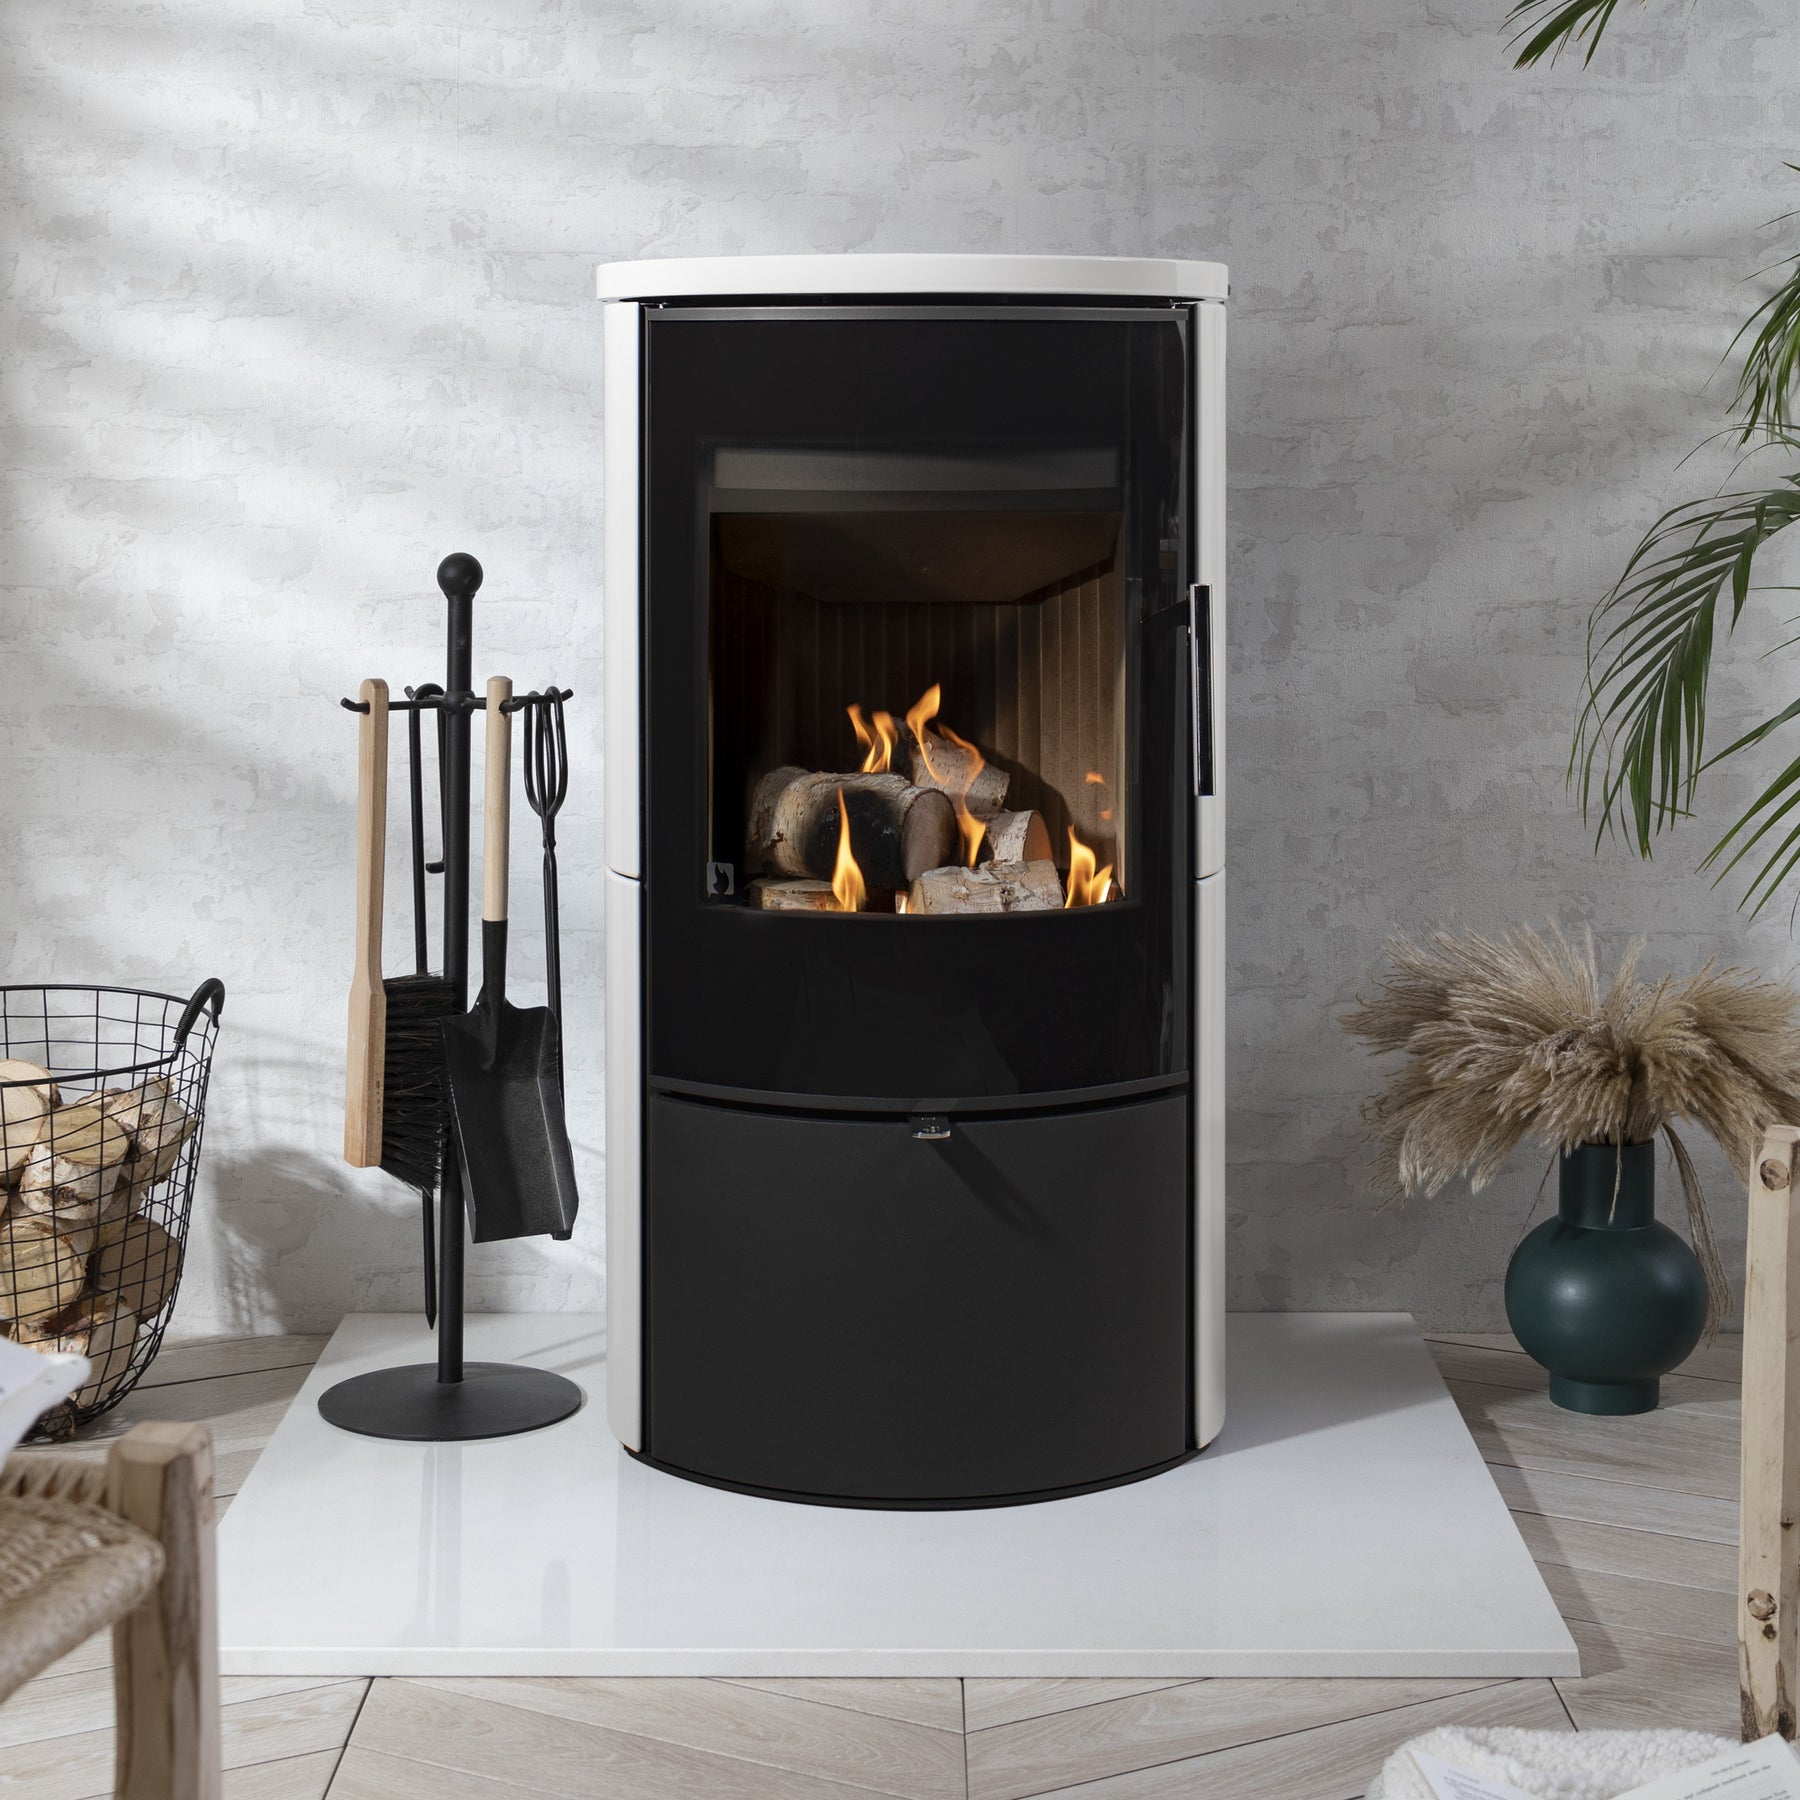 Unsure about wood burning stove installation?